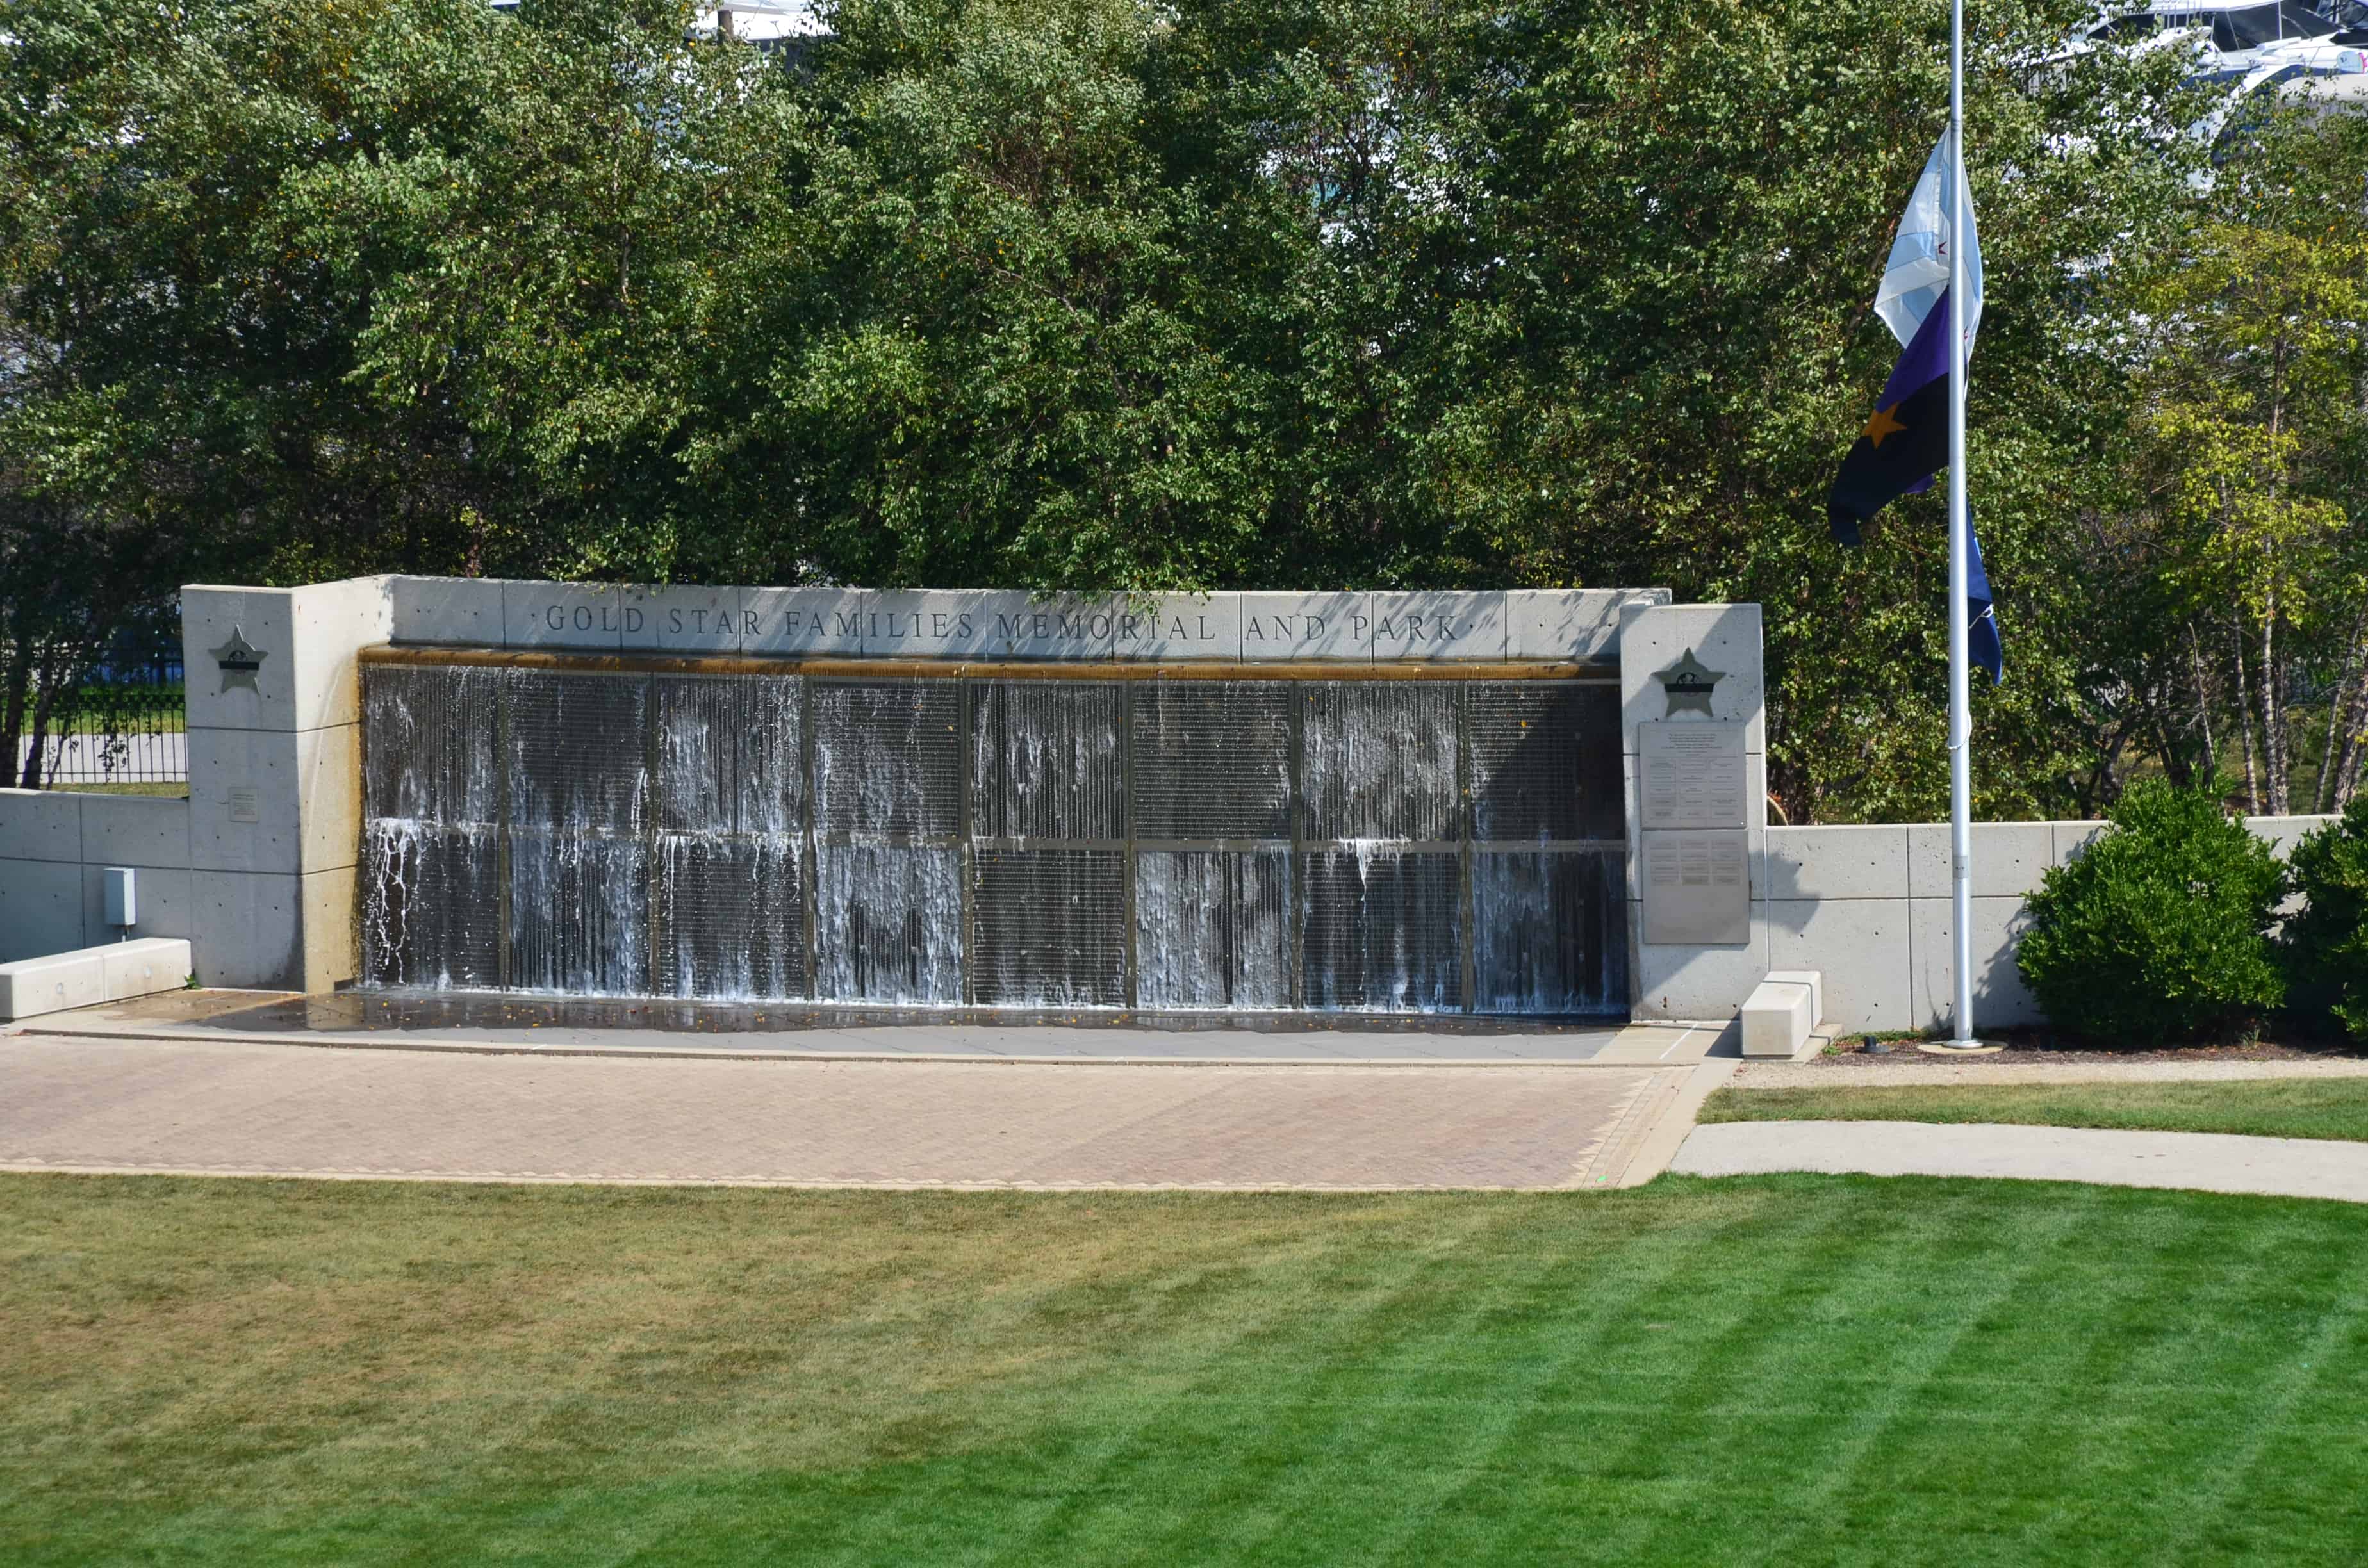 Gold Star Families Memorial and Park at Museum Campus in Chicago, Illinois